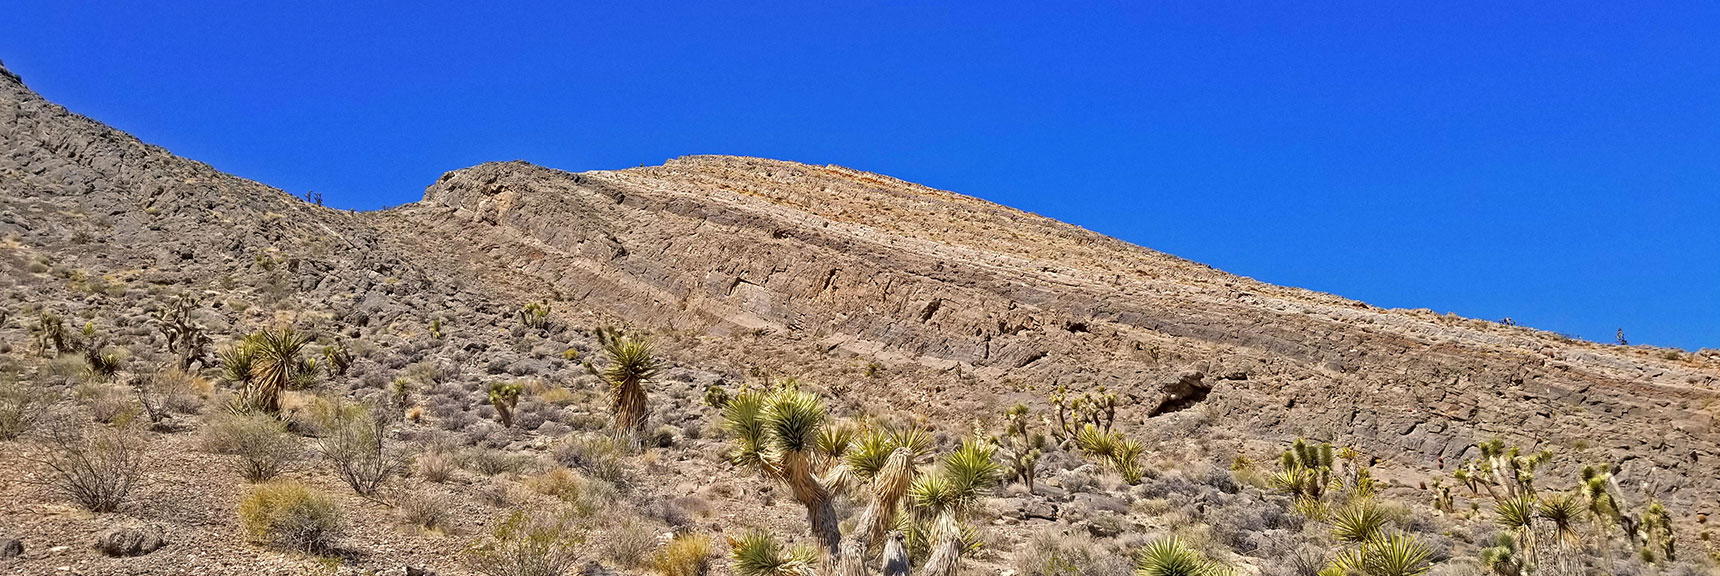 Could Follow Cliff Line to Summit and Back Down to Yucca Gap | Fossil Ridge End to End | Sheep Range | Desert National Wildlife Refuge, Nevada